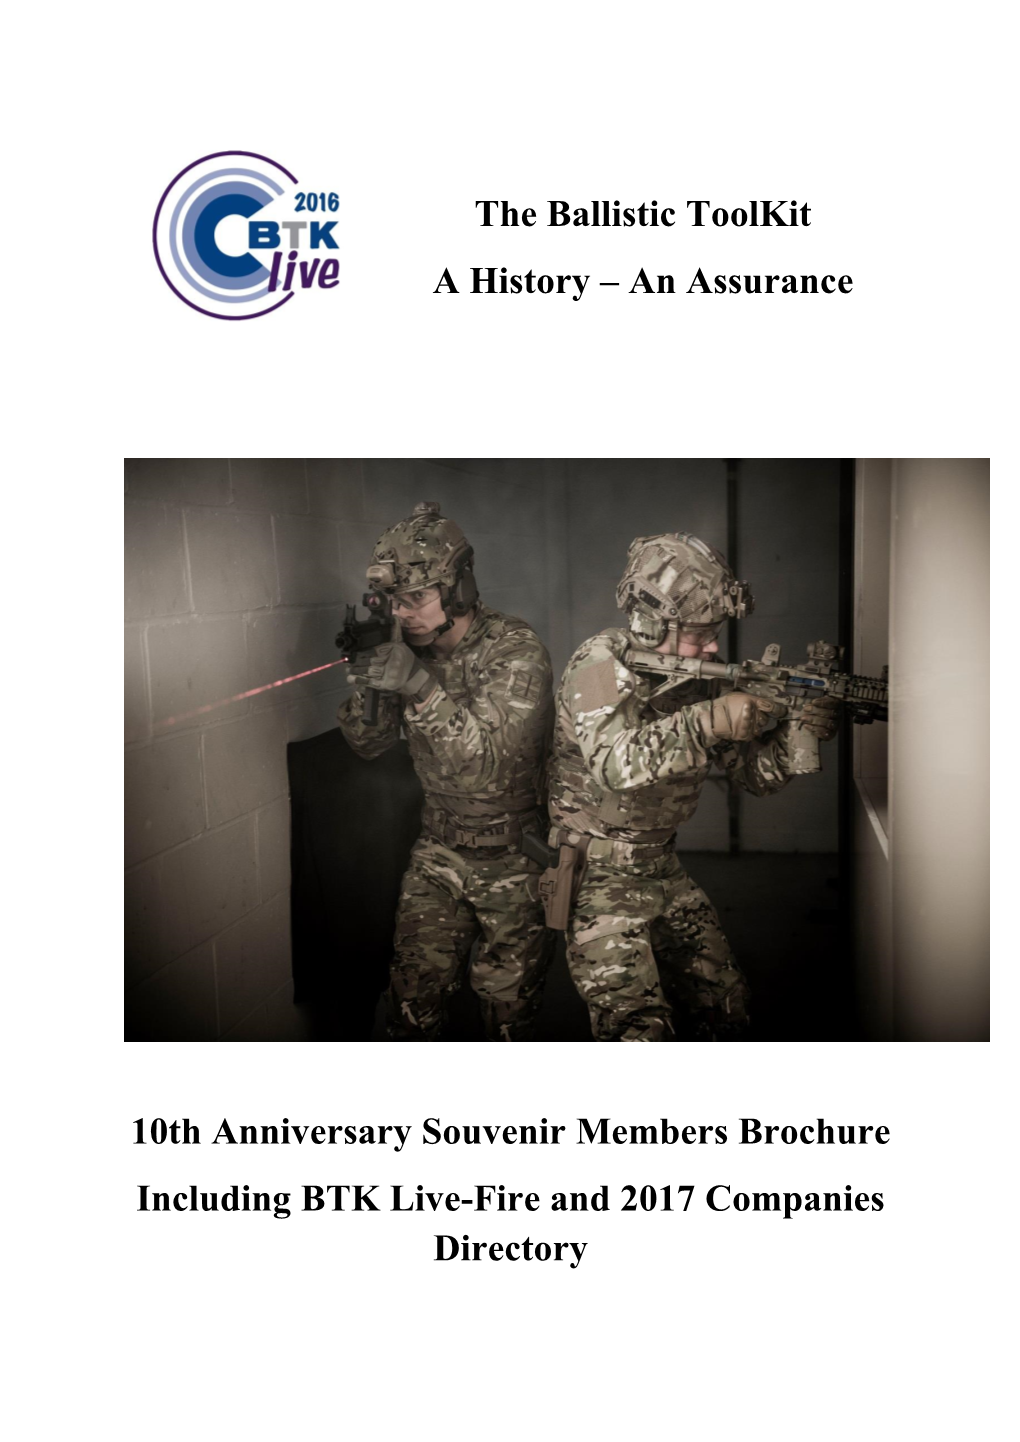 The Ballistic Toolkit a History – an Assurance 10Th Anniversary